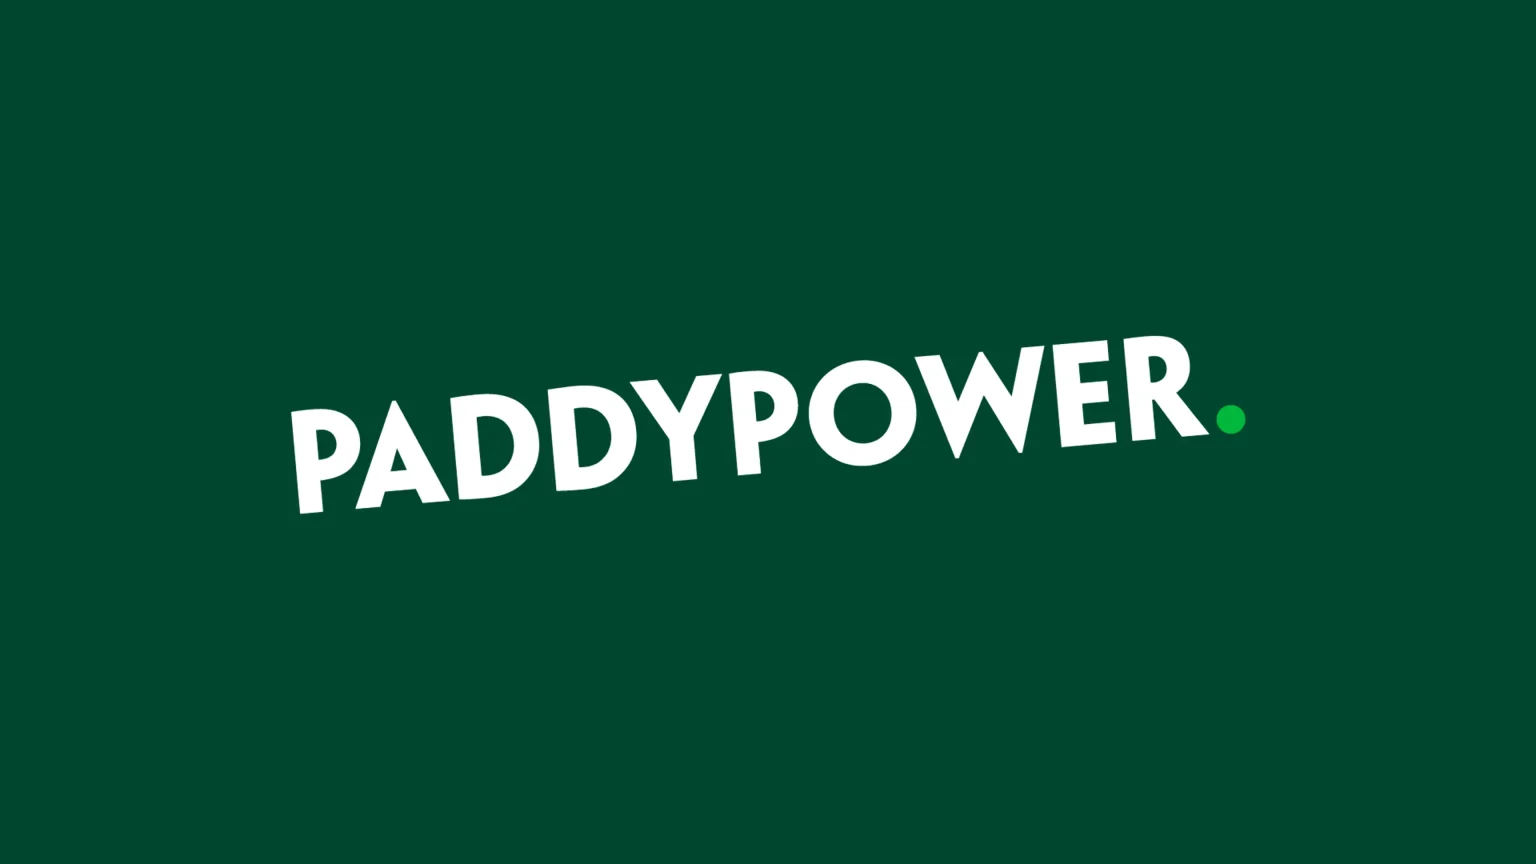 Final Day of Cheltenham - Paddy Power Bet 10 Get Cashback if it Loses